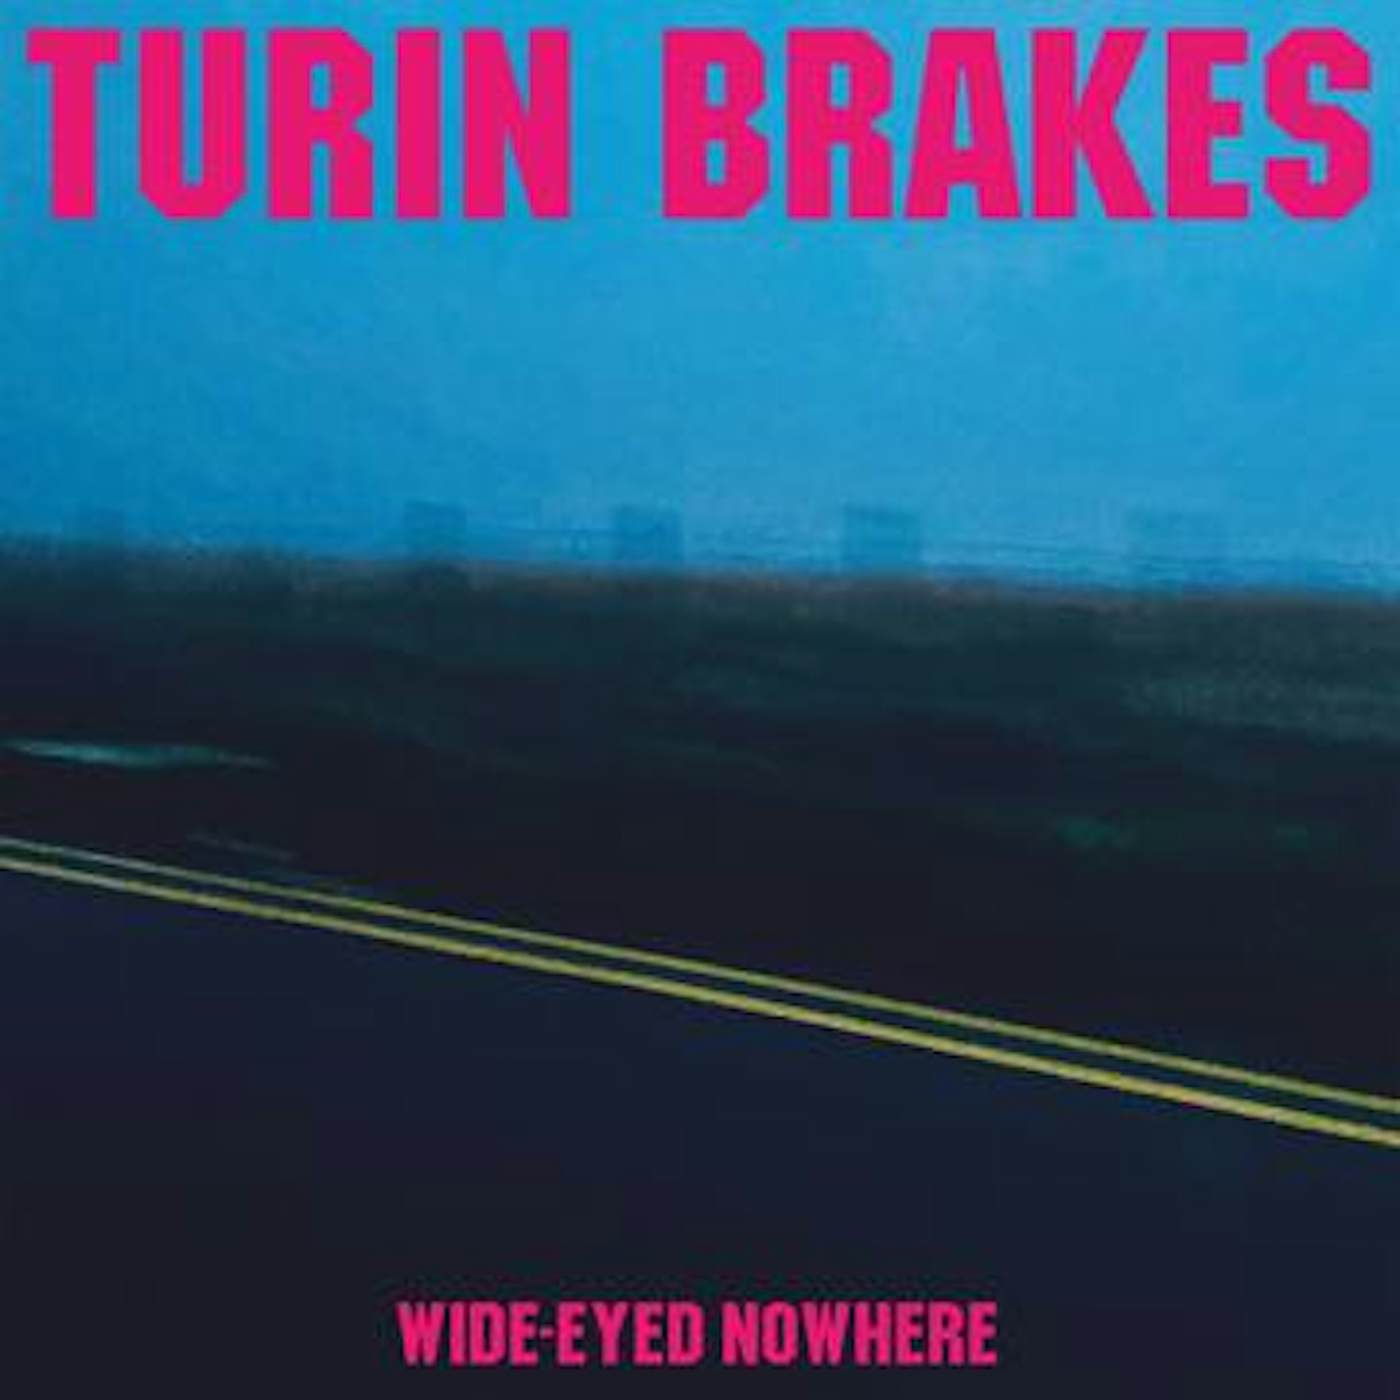 Turin Brakes WIDE-EYED NOWHERE CD